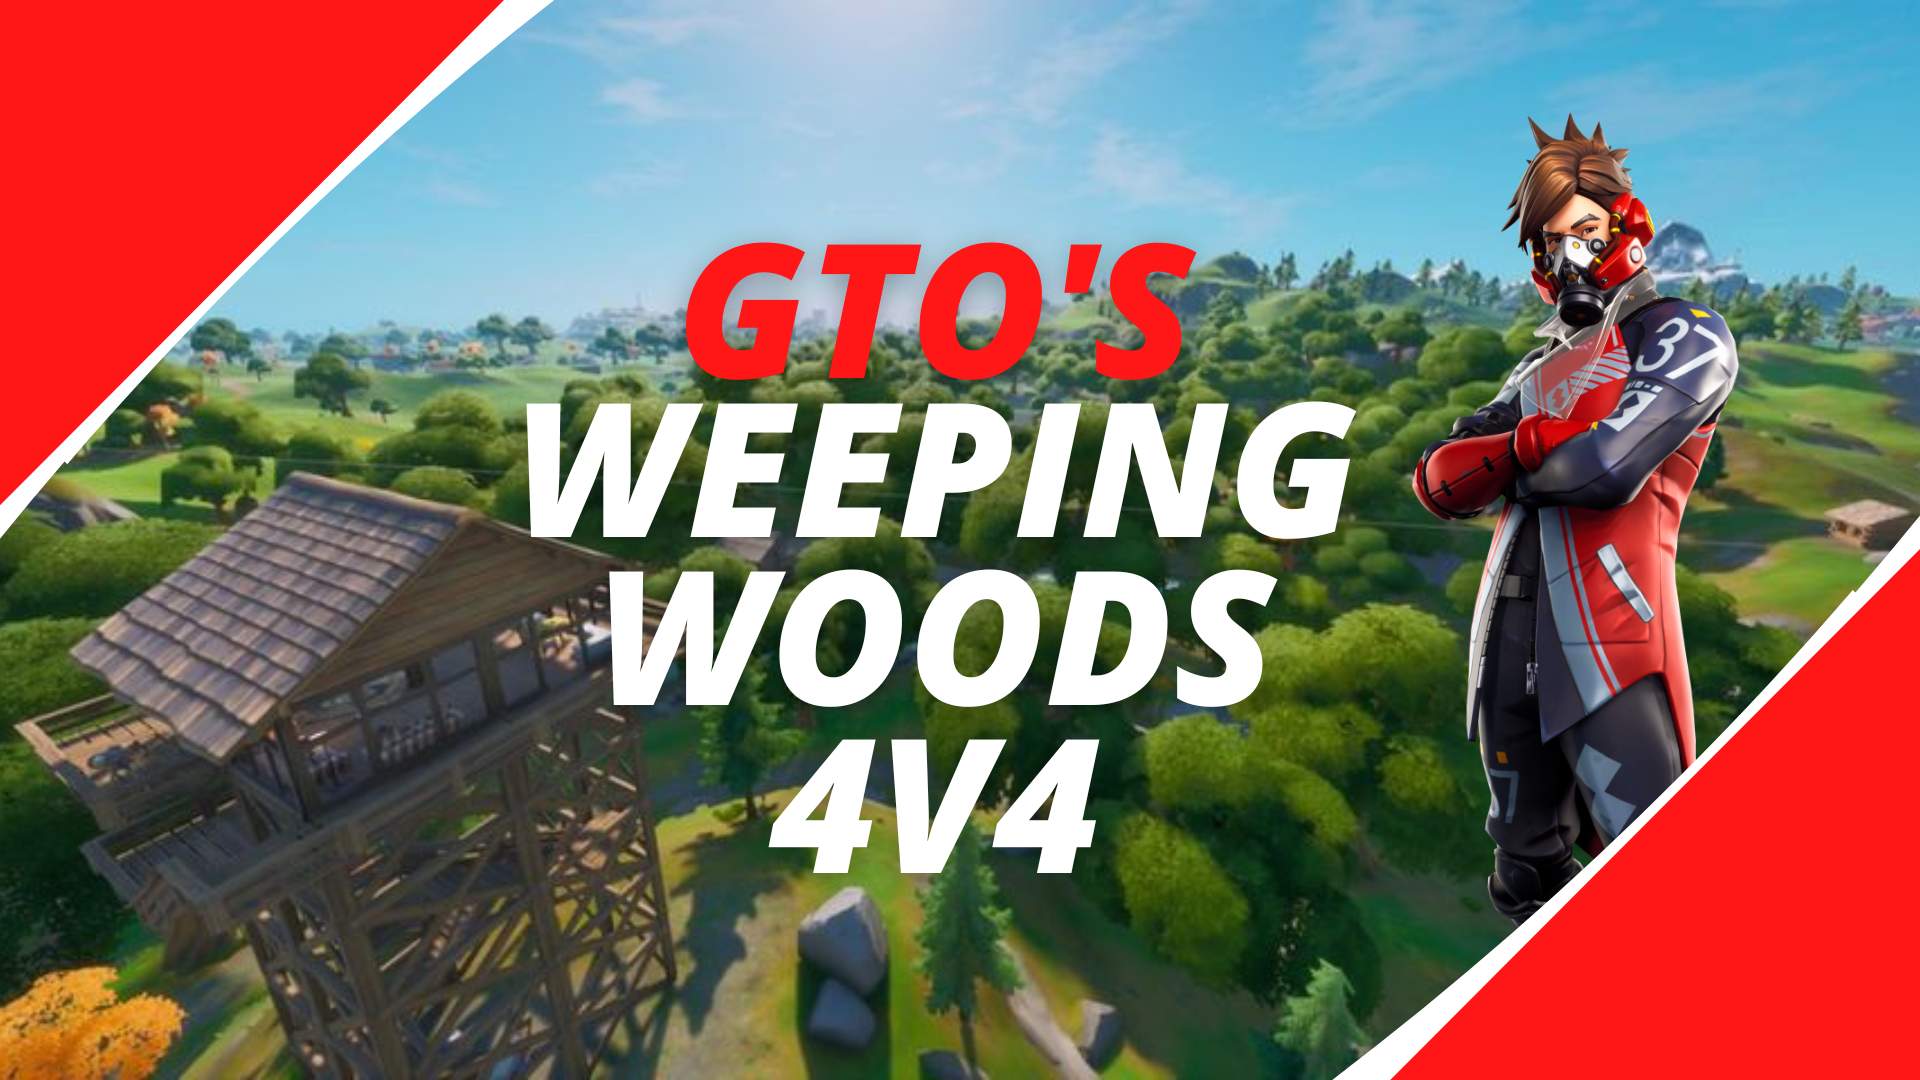 GTO'S WEEPING WOODS 4v4